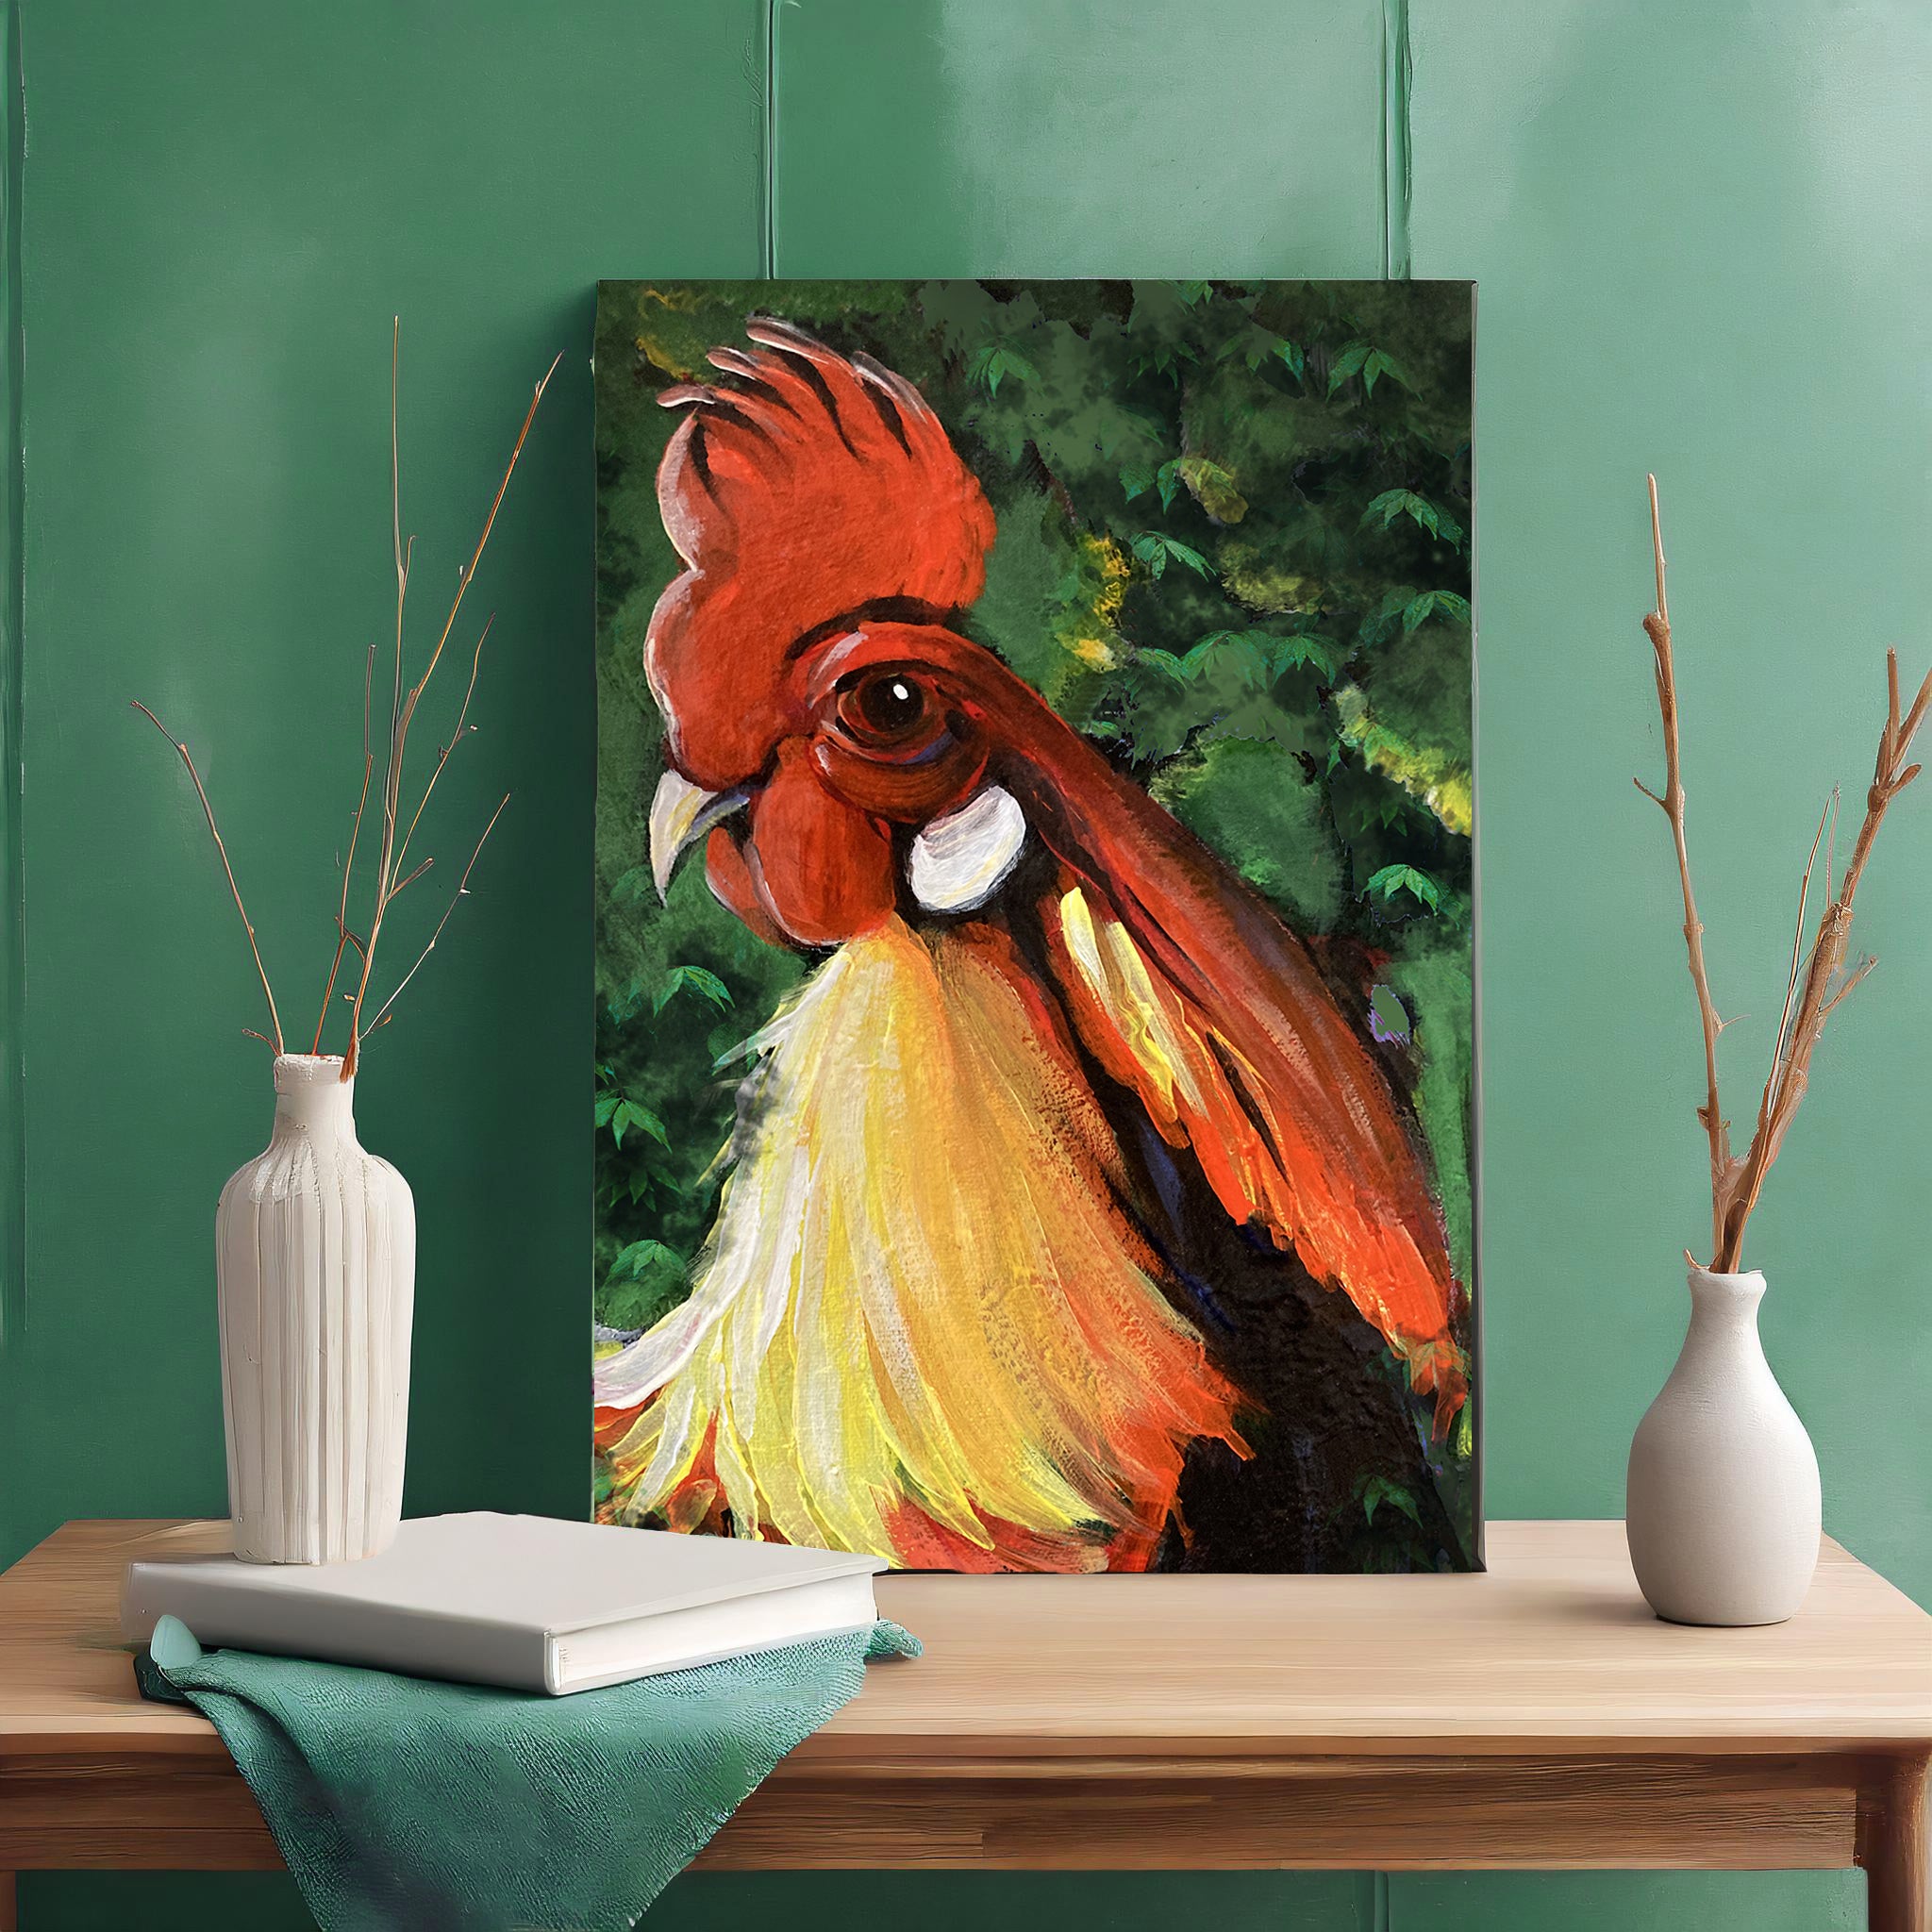 Rooster on Canvas Wall Art, 8"x 12", 'Big Eye Rooster'